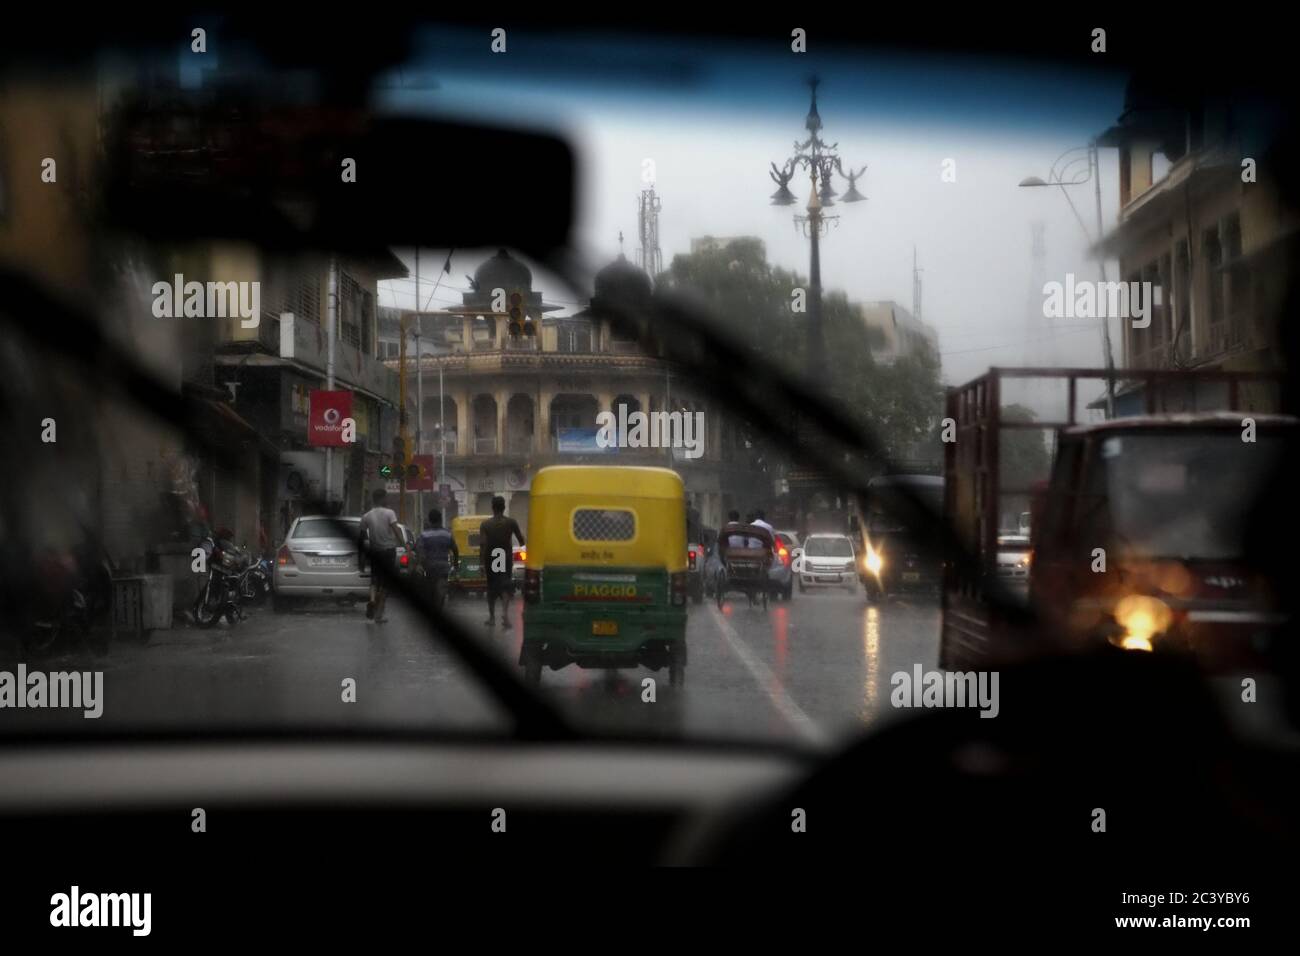 A scene of a road traffic seen from inside a moving car on a rainy afternoon in Jaipur, Rajasthan, India. Stock Photo